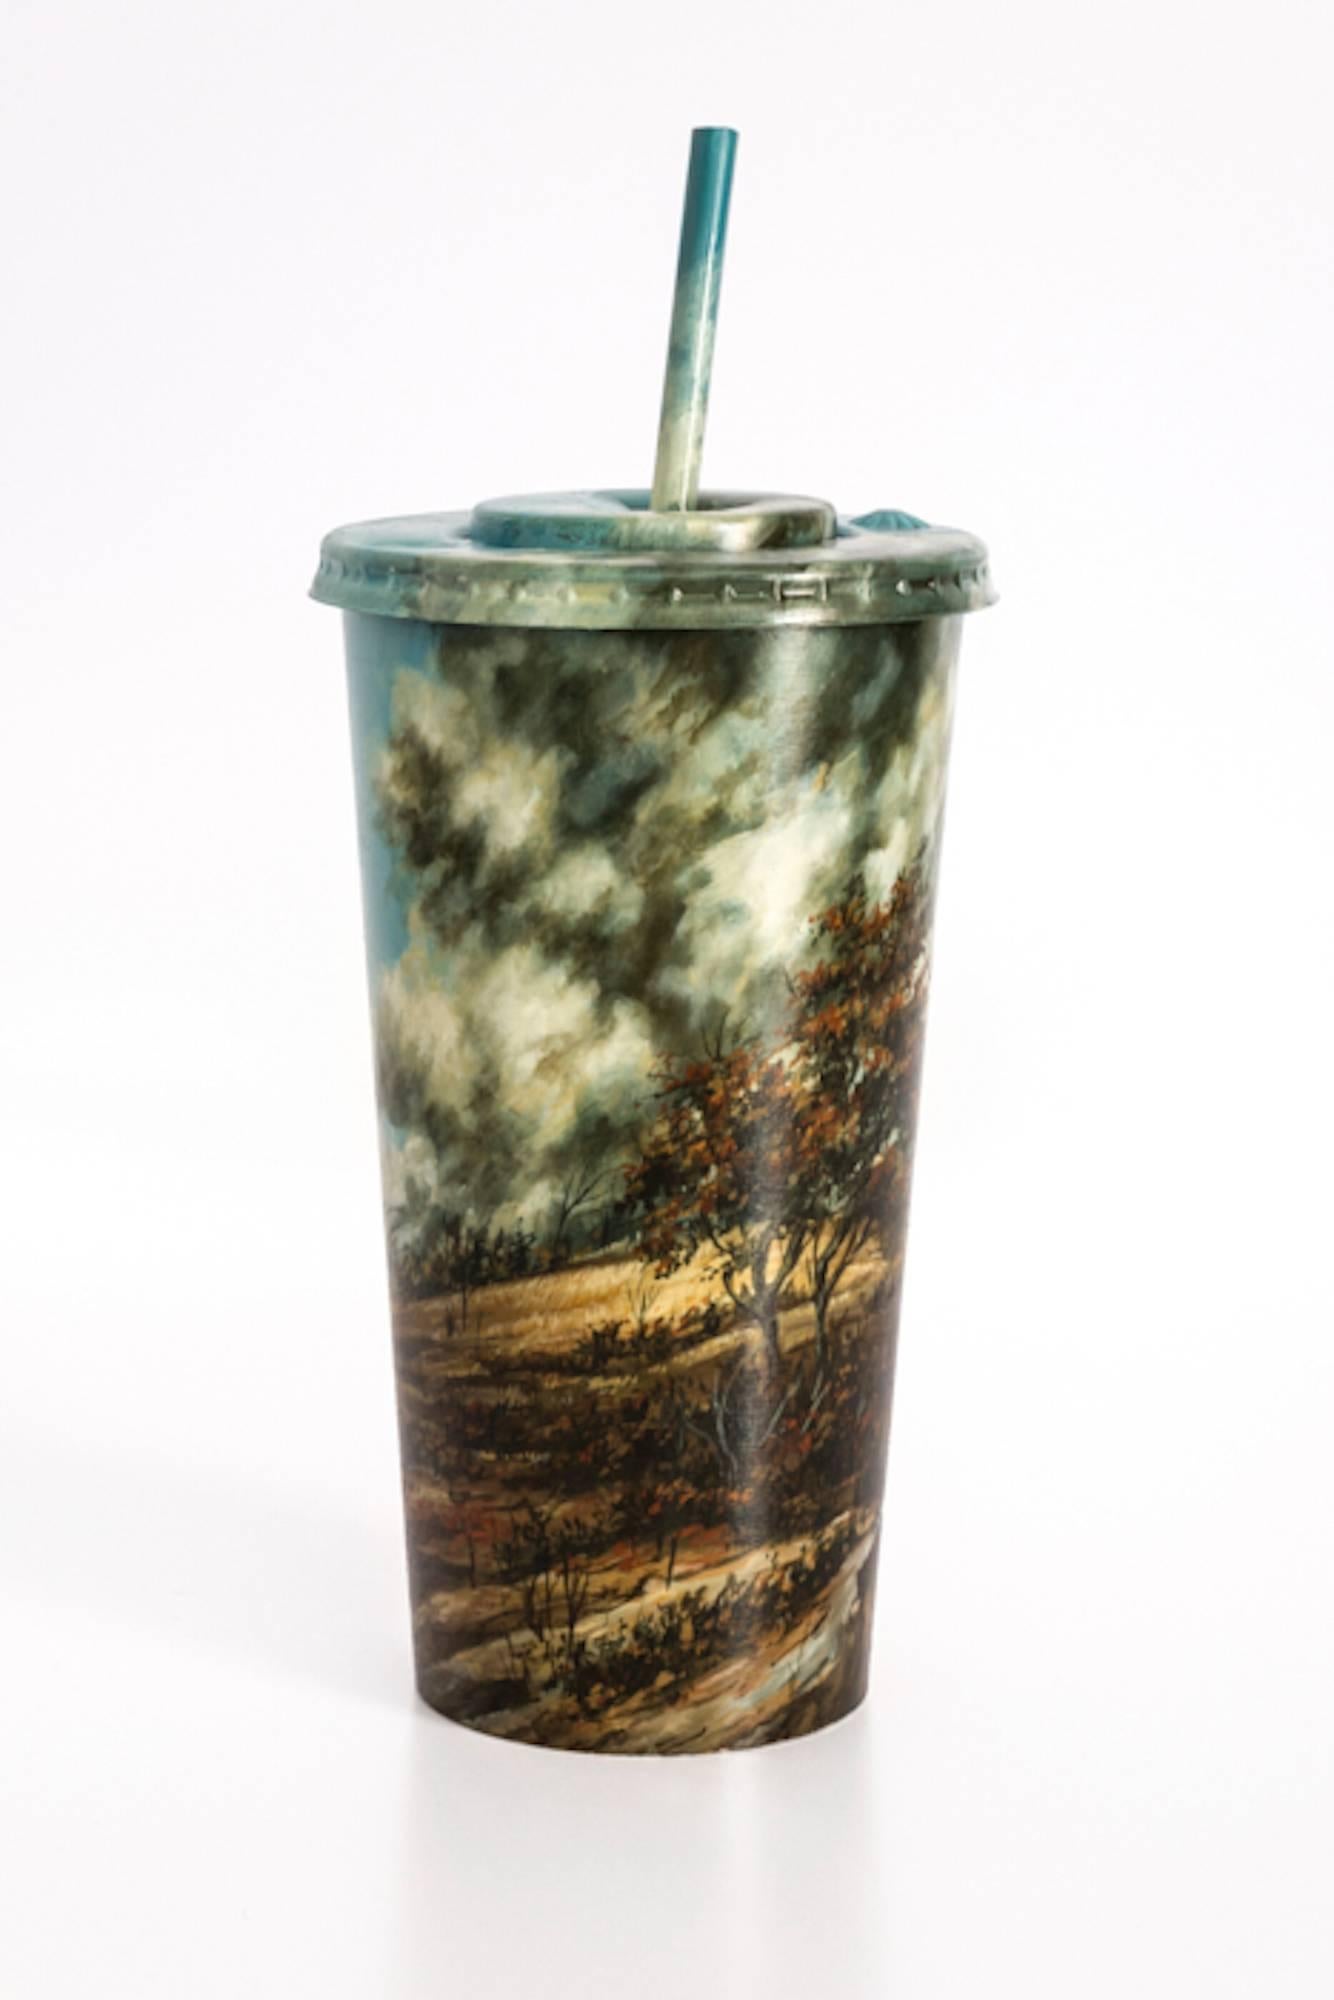 Untitled #1 from 'Biotá' series, Still Life Painting on Cardboard Cup - Sculpture by Armando de la Garza